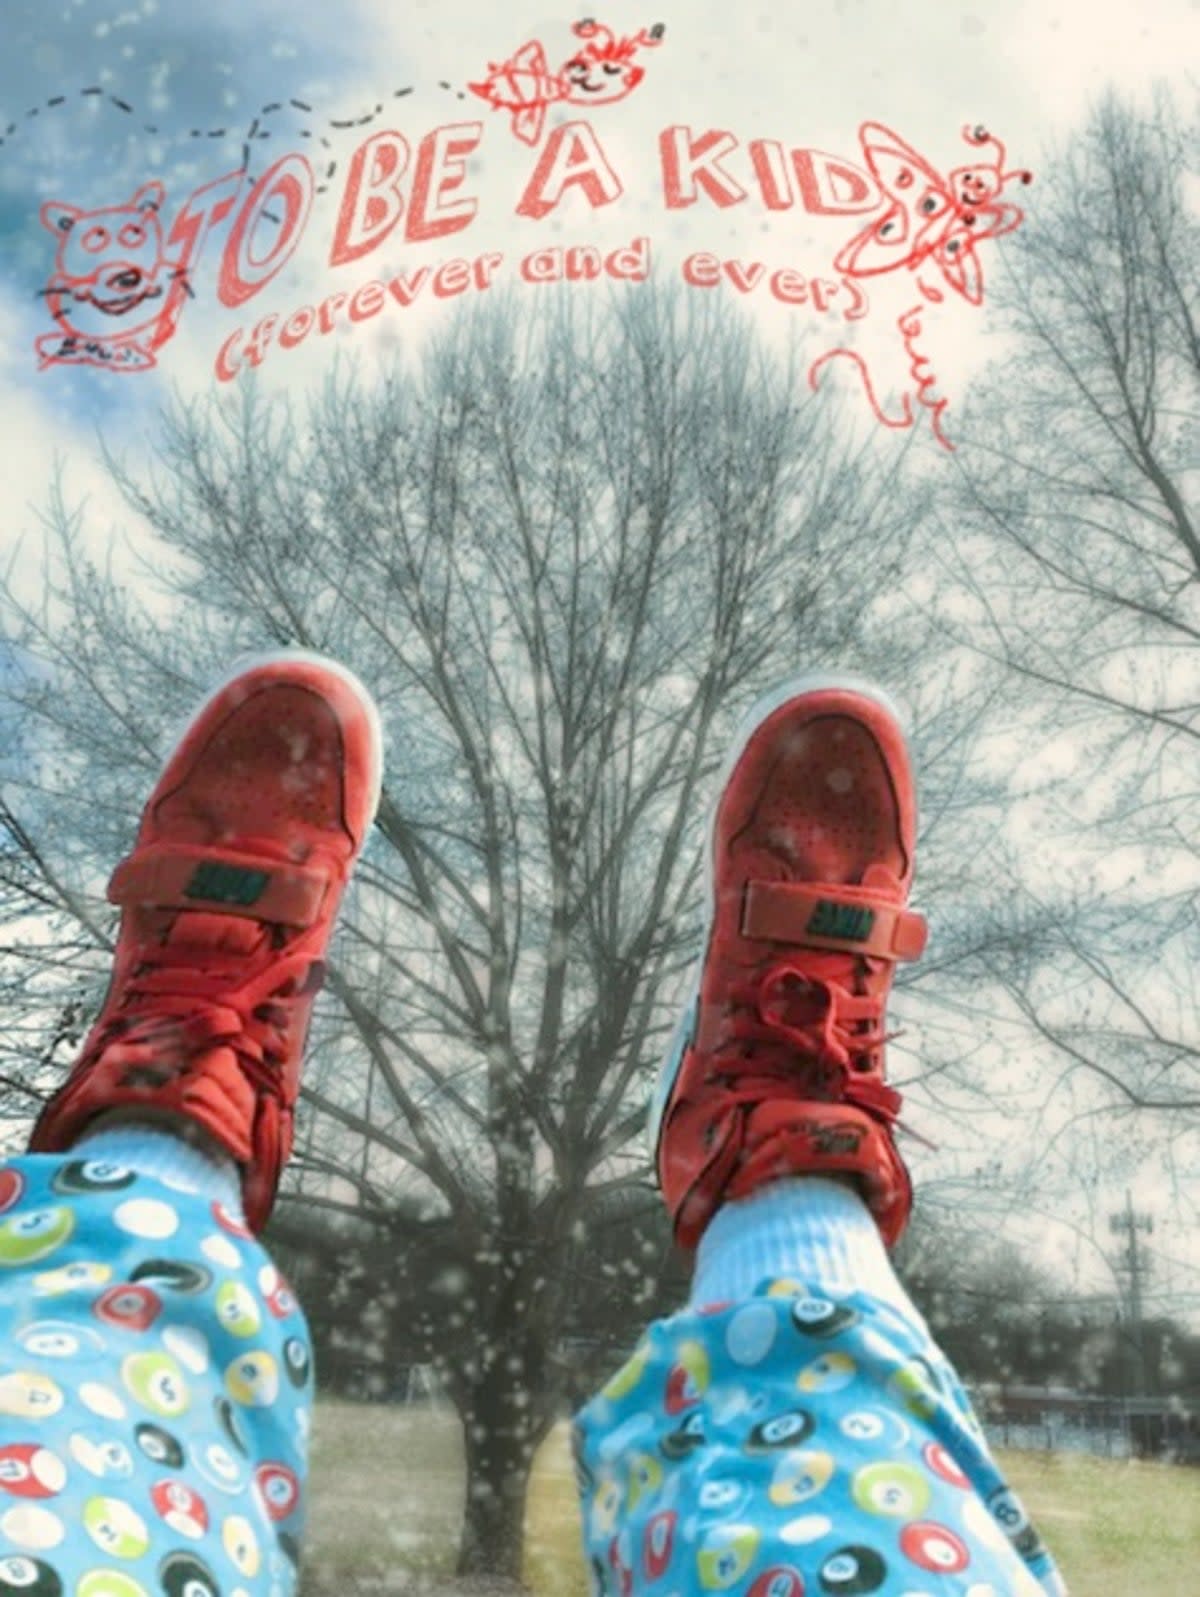 Another image on the website appears to show Hale’s feet with the phrase “To be a kid forever and ever” across it – as Hale is now accused of killing three small children (AH Illustrations)